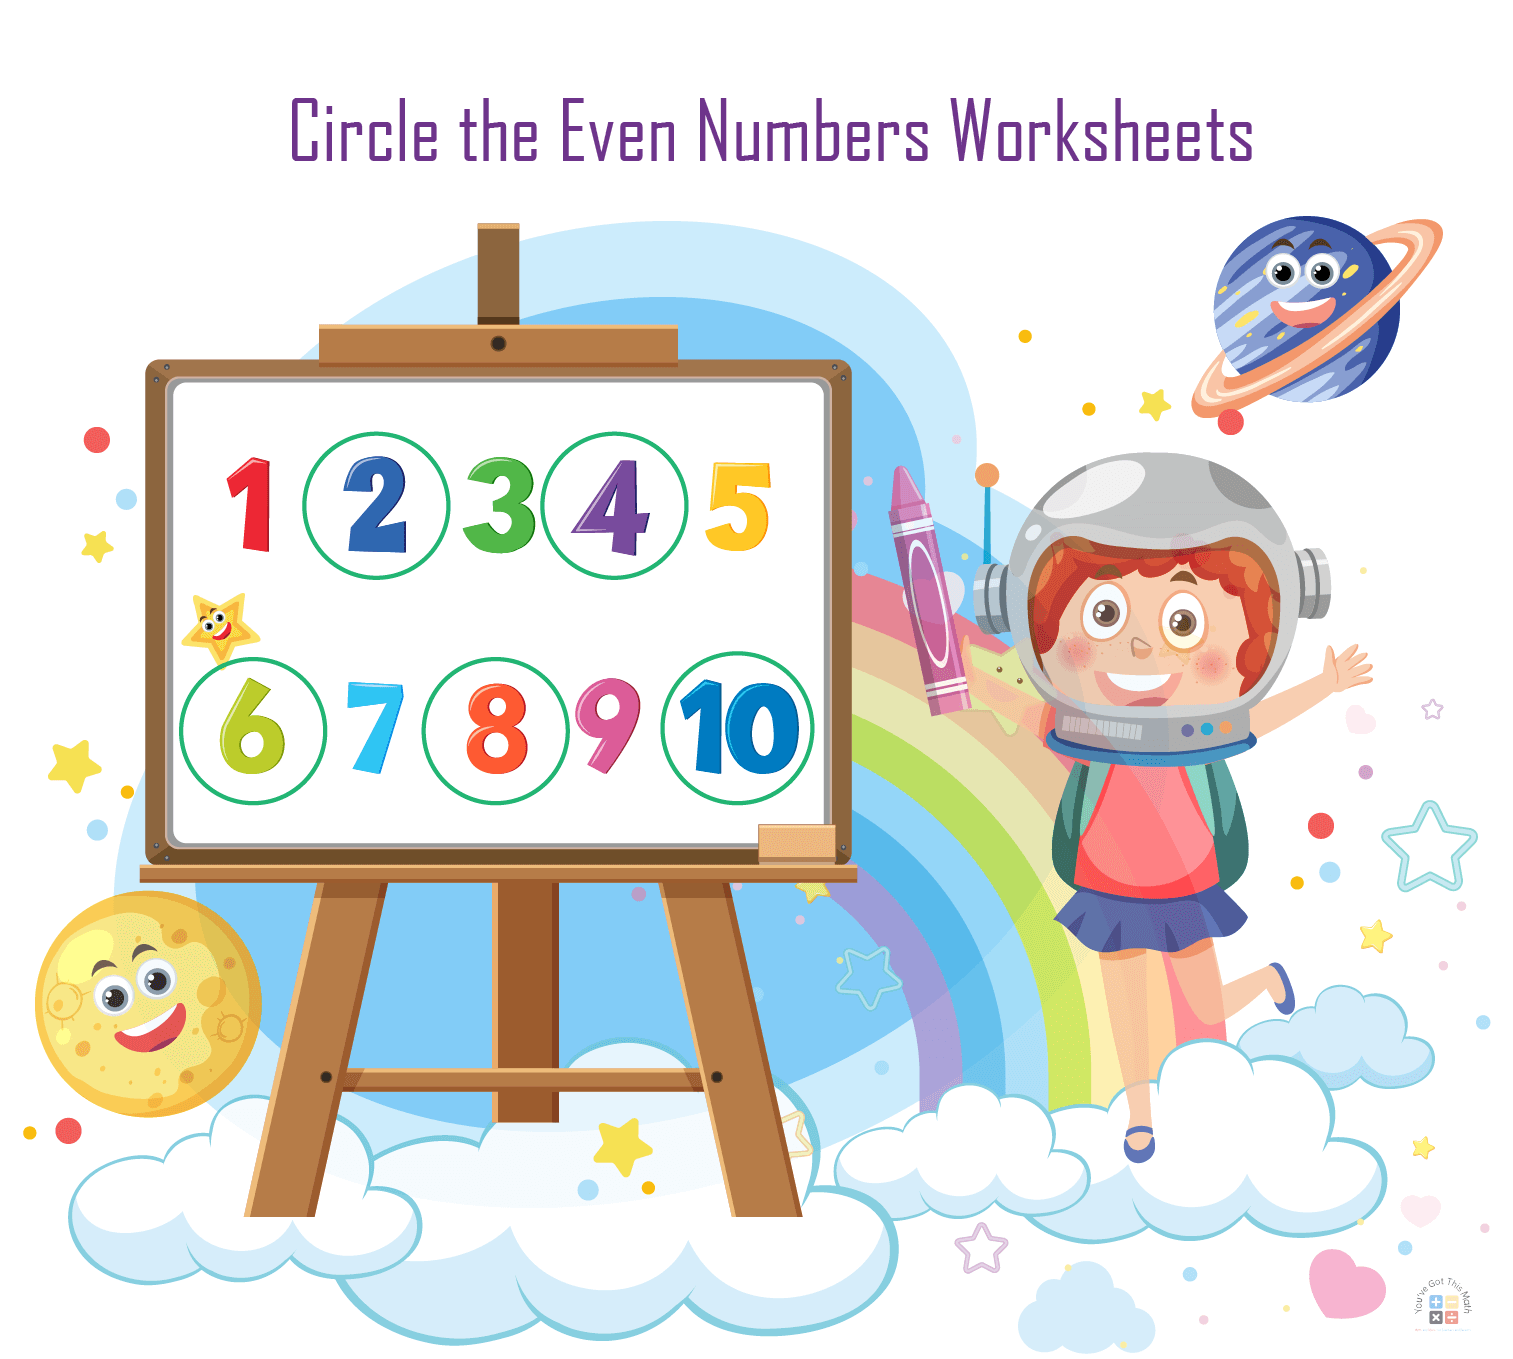 7 Circle the Even Numbers Worksheets | Free Printable